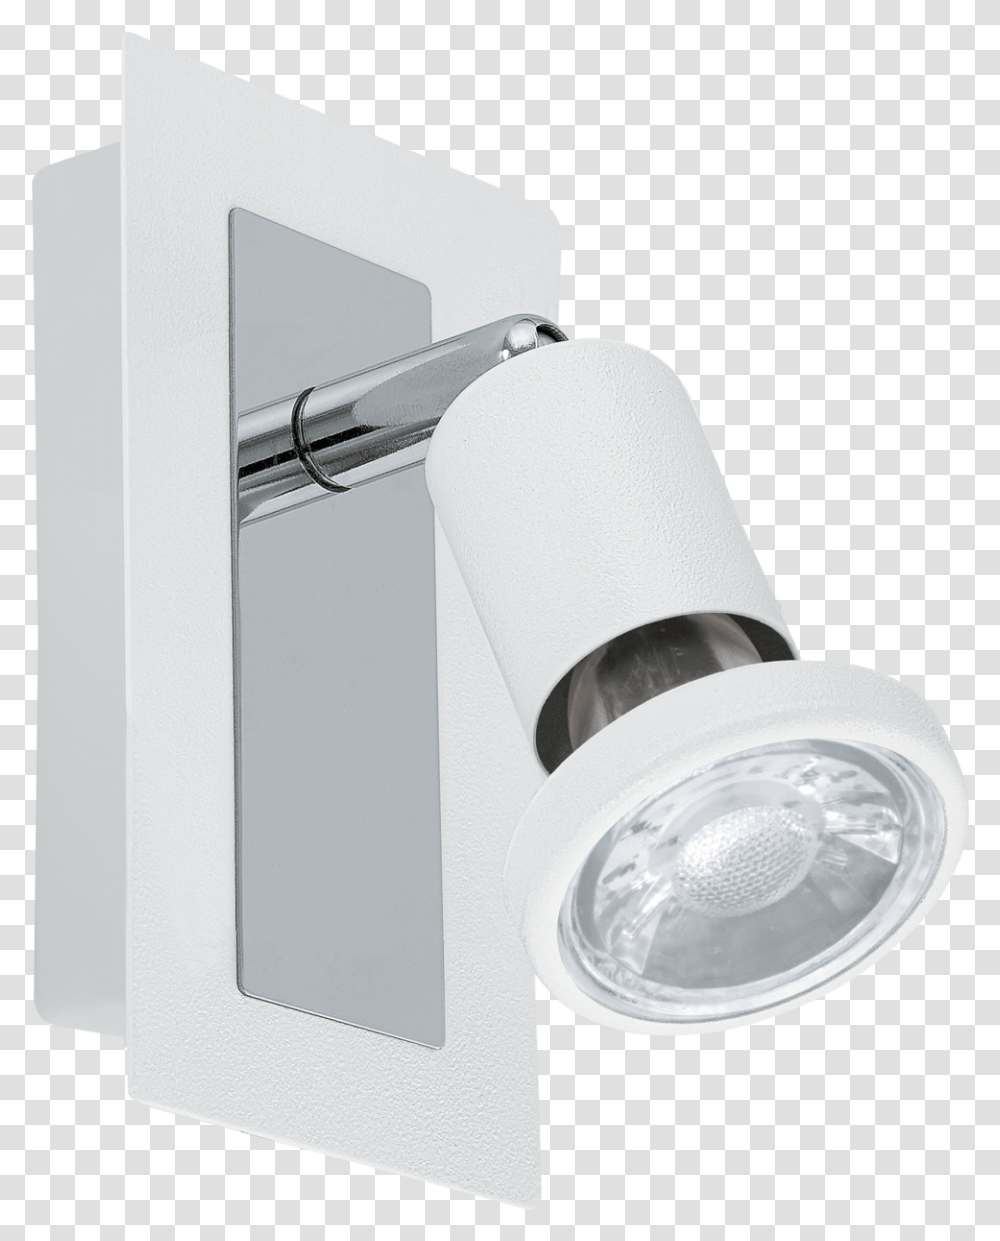 White Spotlight Sarria Led Wall Mounted Spotlight Light Fitting, Lighting, Sink Faucet, Shower Faucet, Mailbox Transparent Png